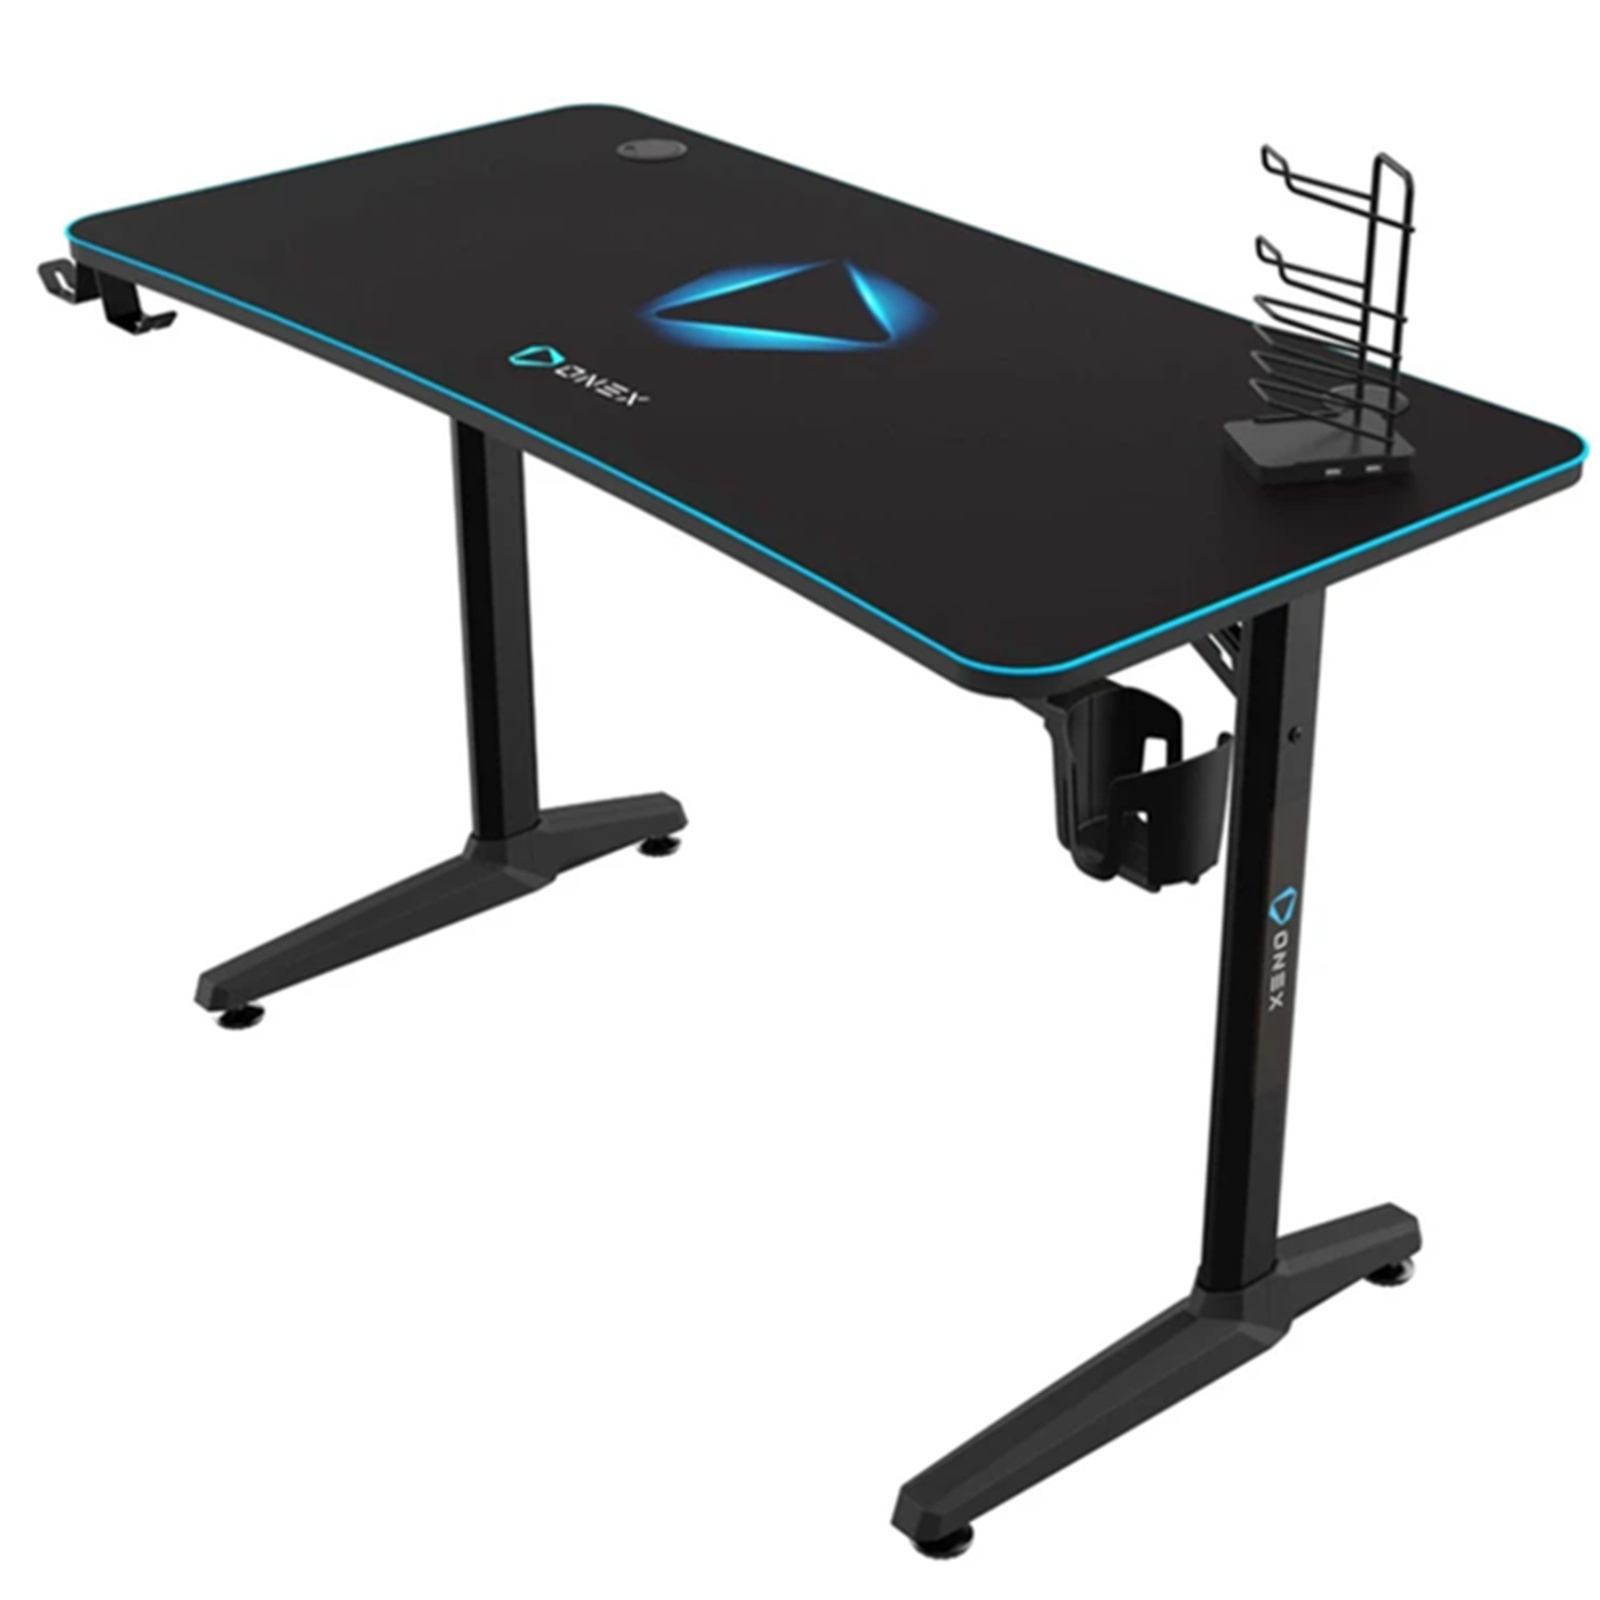 Buy the ONEX GD1200H Gaming Desk With Mouse Pad, Cup Holder, Headset  Holder,... ( ONEX-GD1200H ) online - PBTech.com/pacific